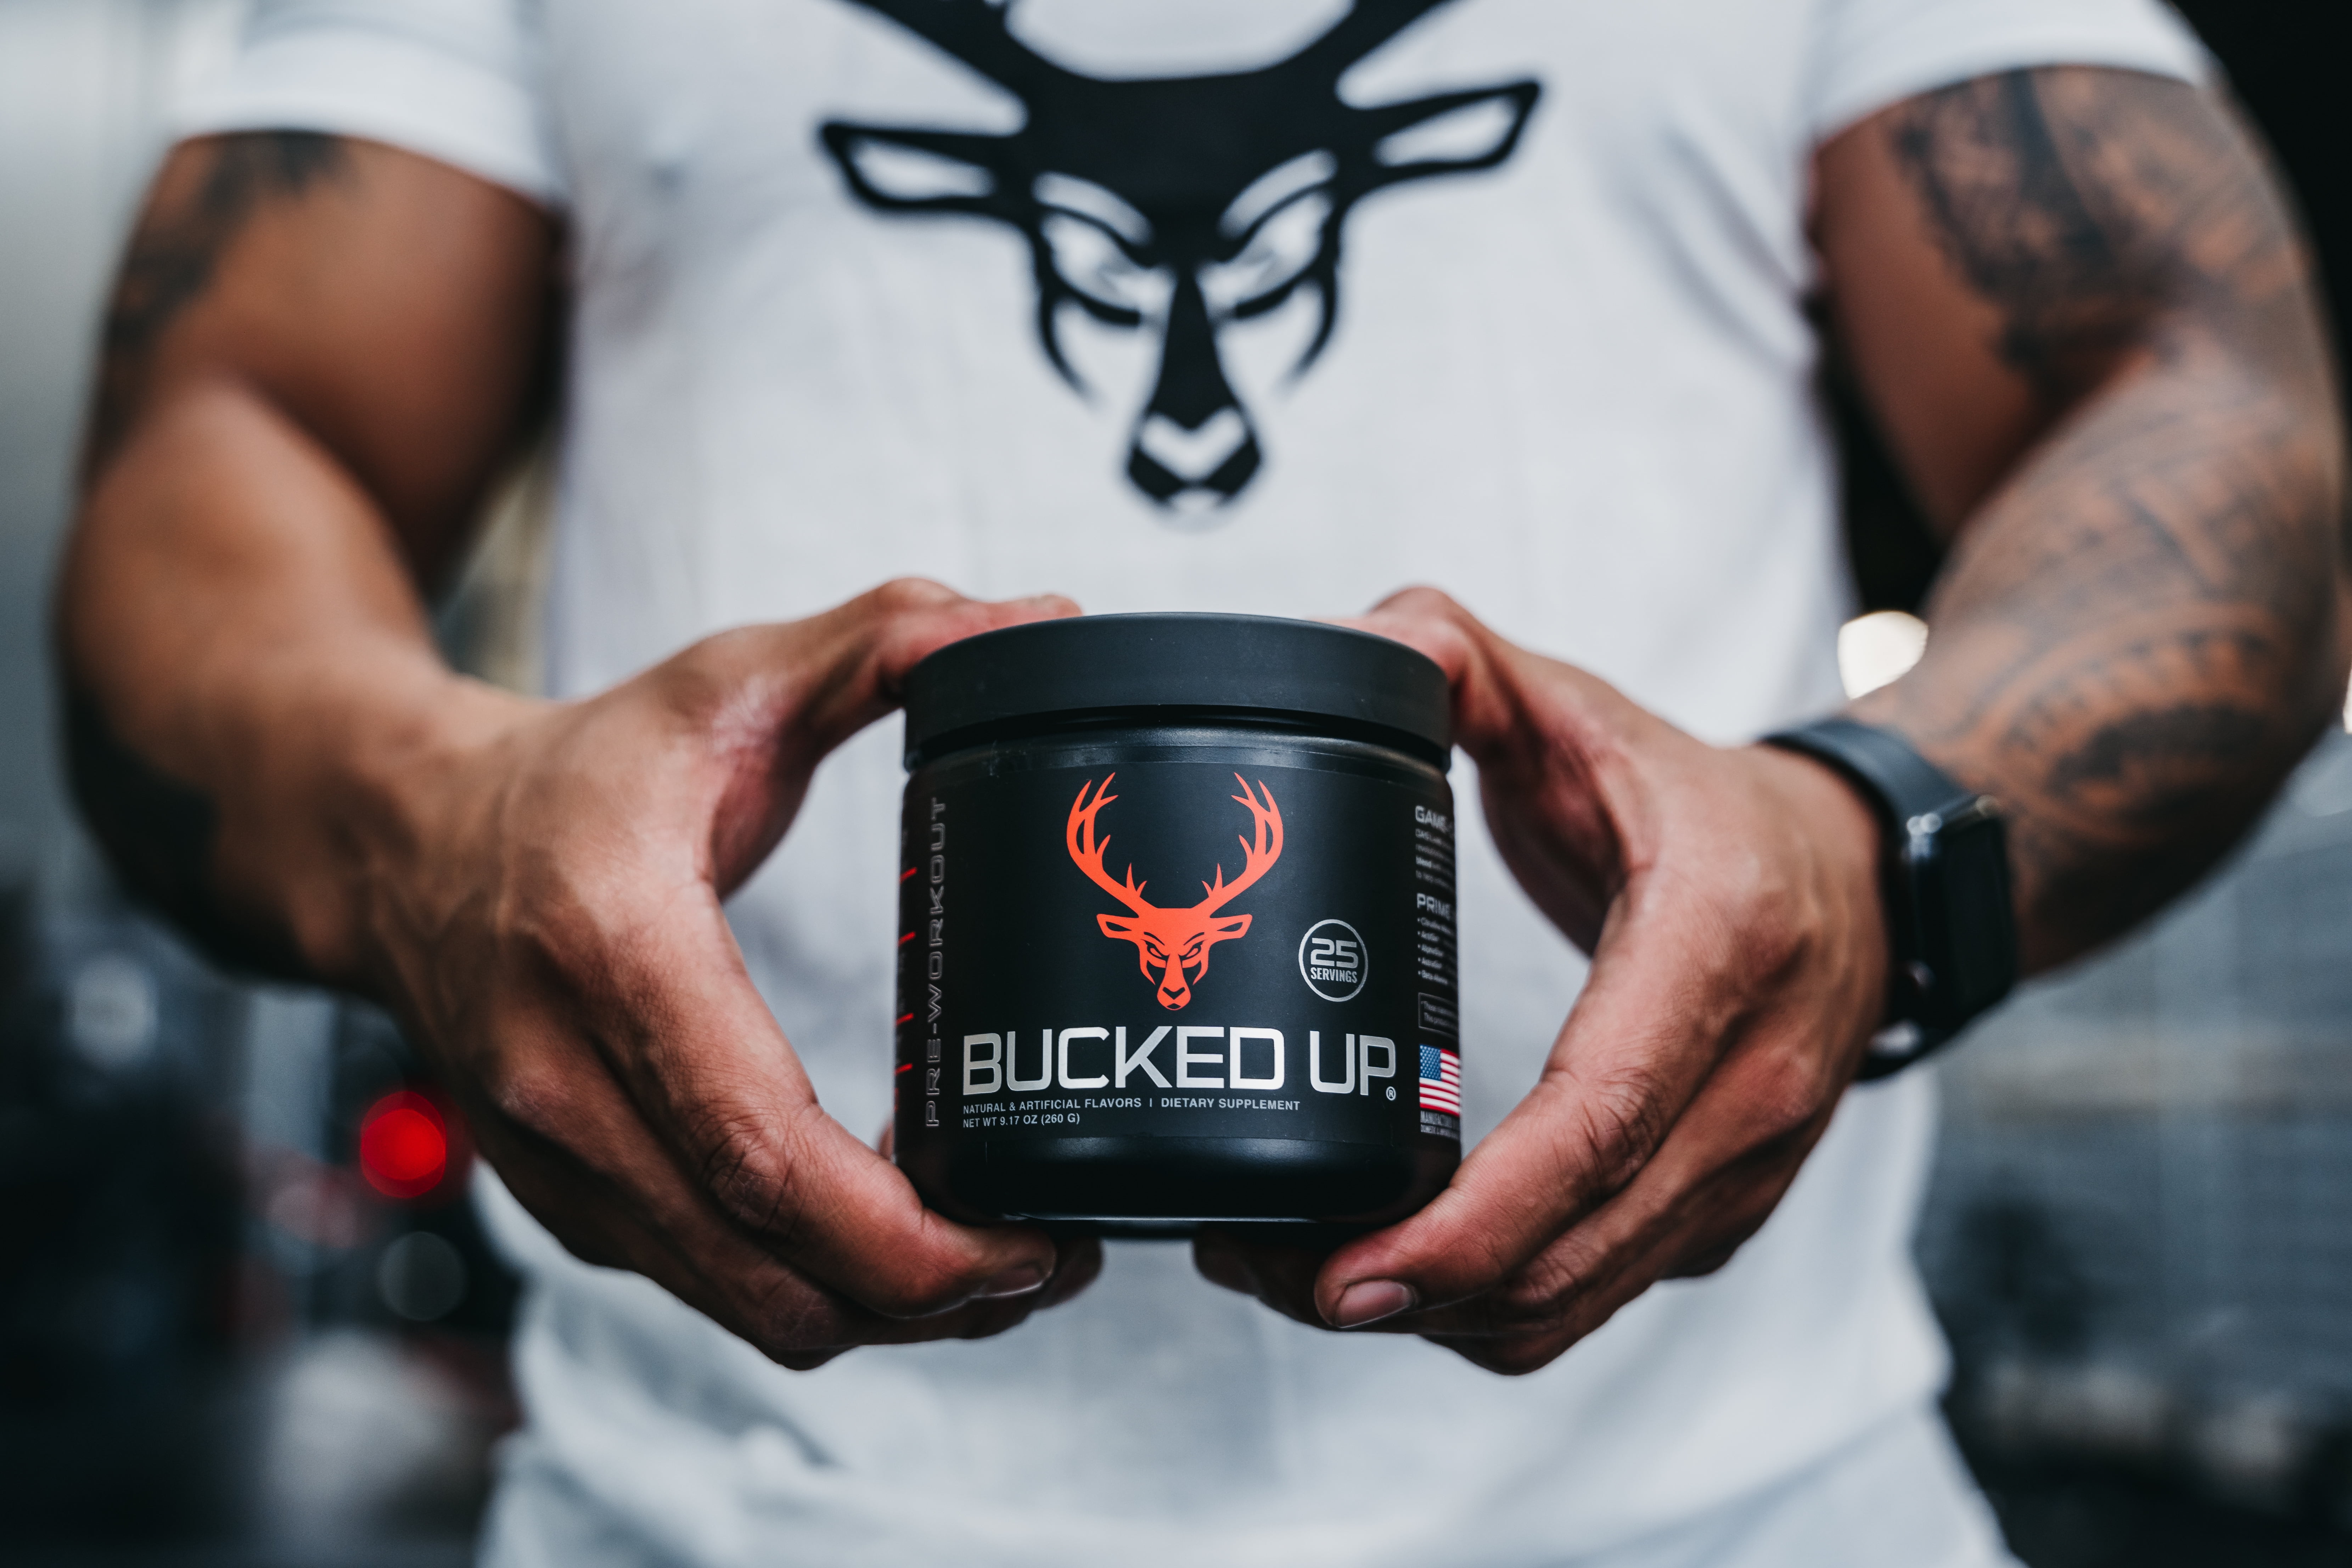 Try our Bucking Amazing Pre-workout for just $1 + Shipping! We'll even